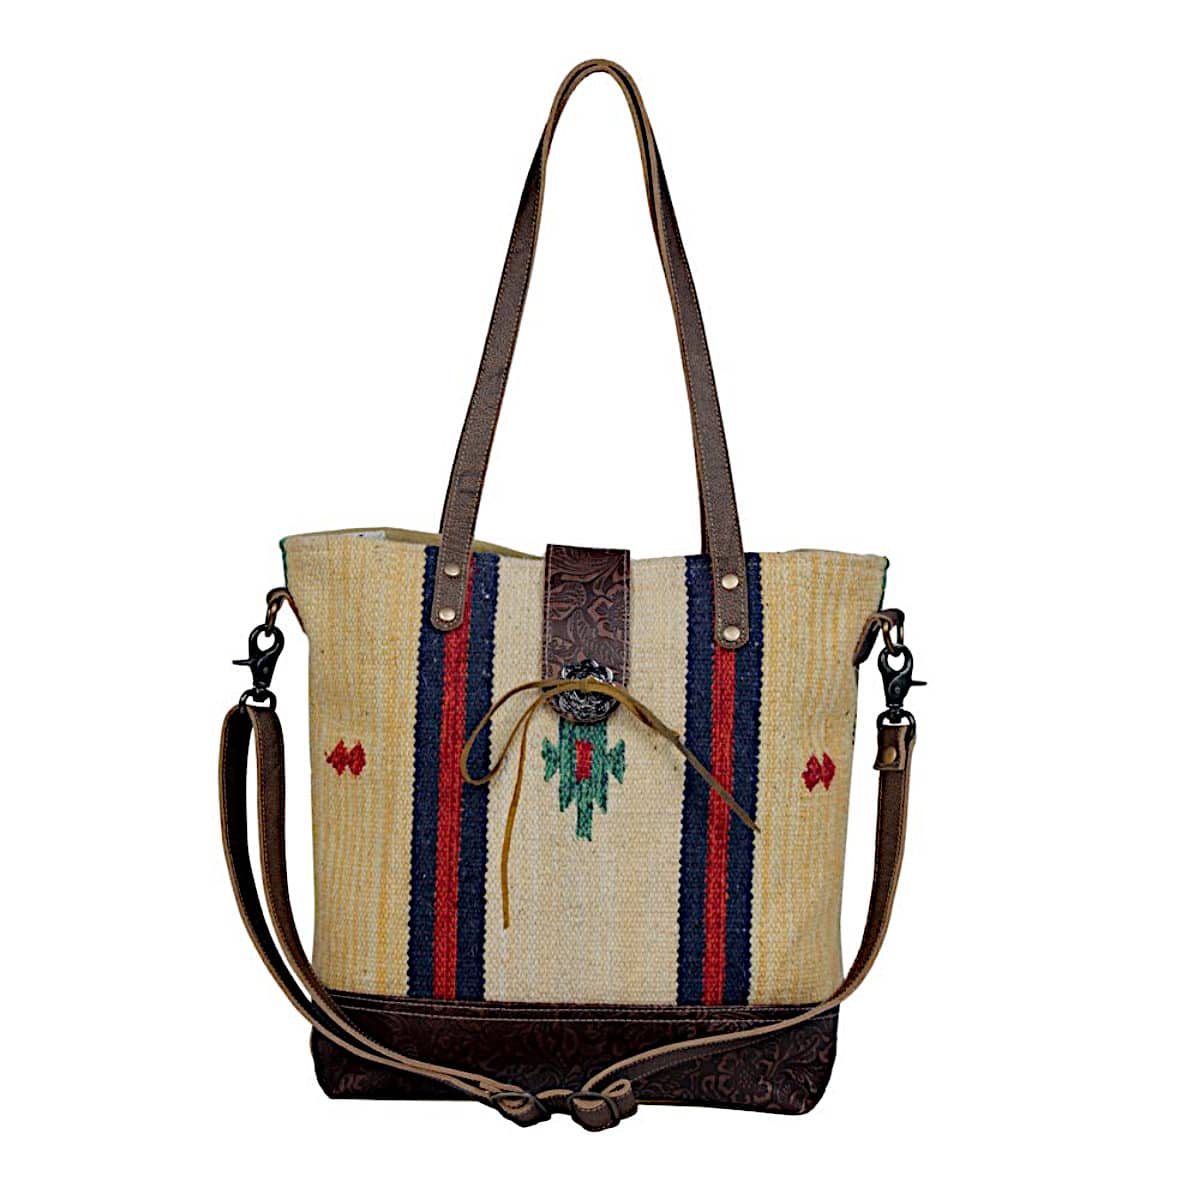 Brown Feathers Bag Canvas Fabric Hobo Shoulder Purse Large 